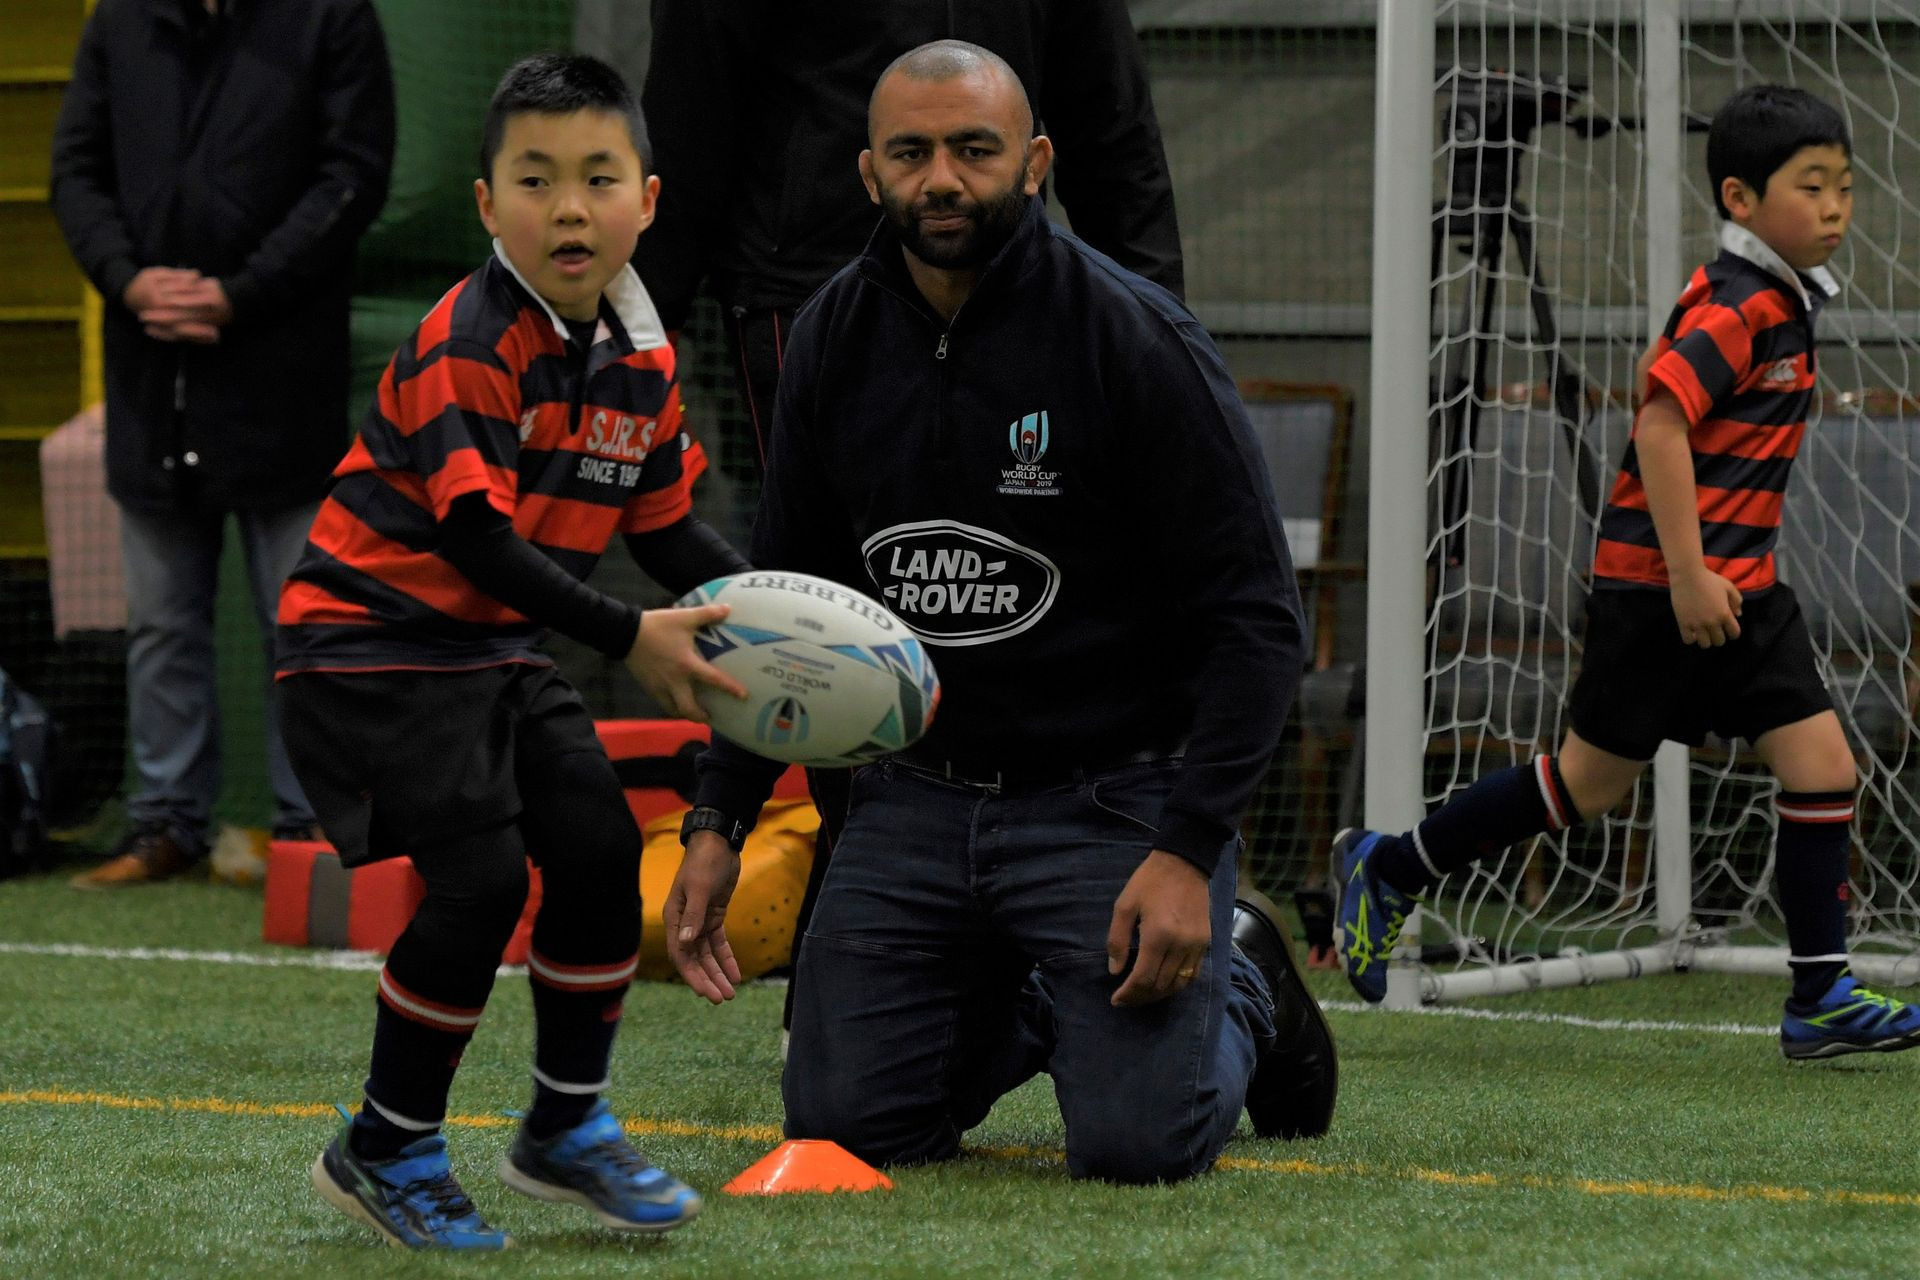 A second series of rugby introduction days have been organised in Japan ©World Rugby